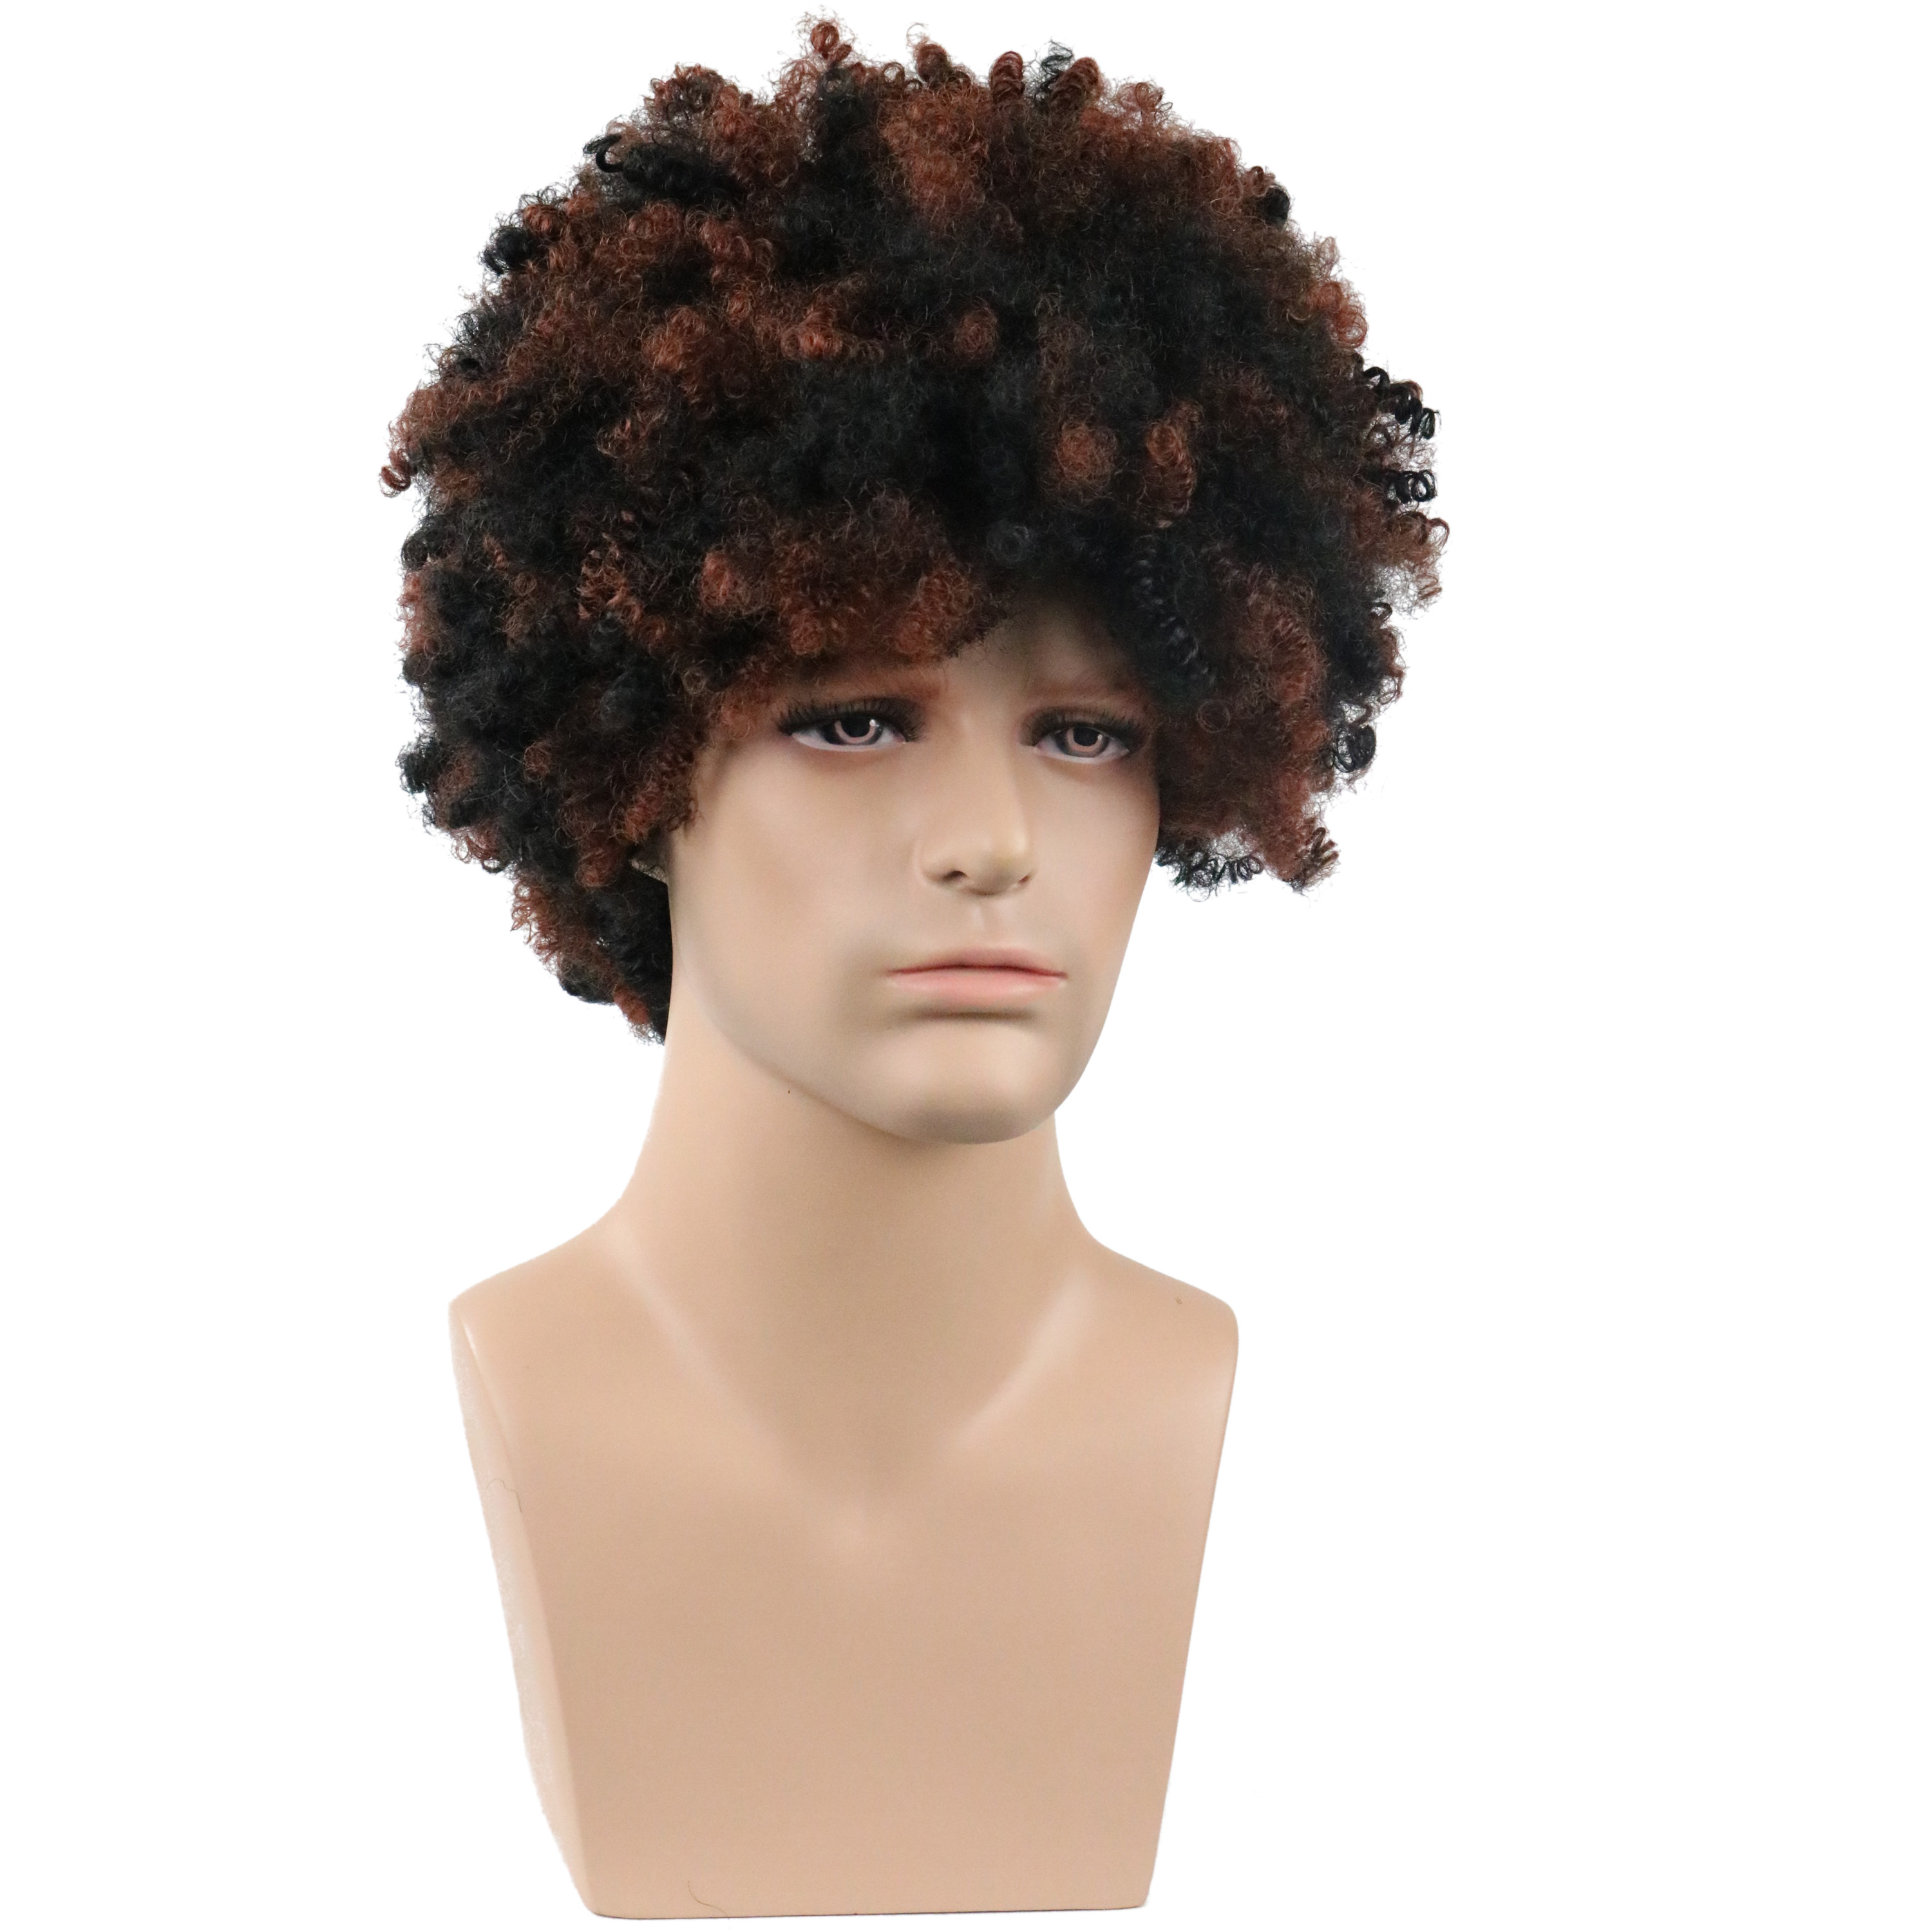 Men's Short Afro Curly Synthetic Hair Capless Wigs Black&Brown Mixed Color 12inch